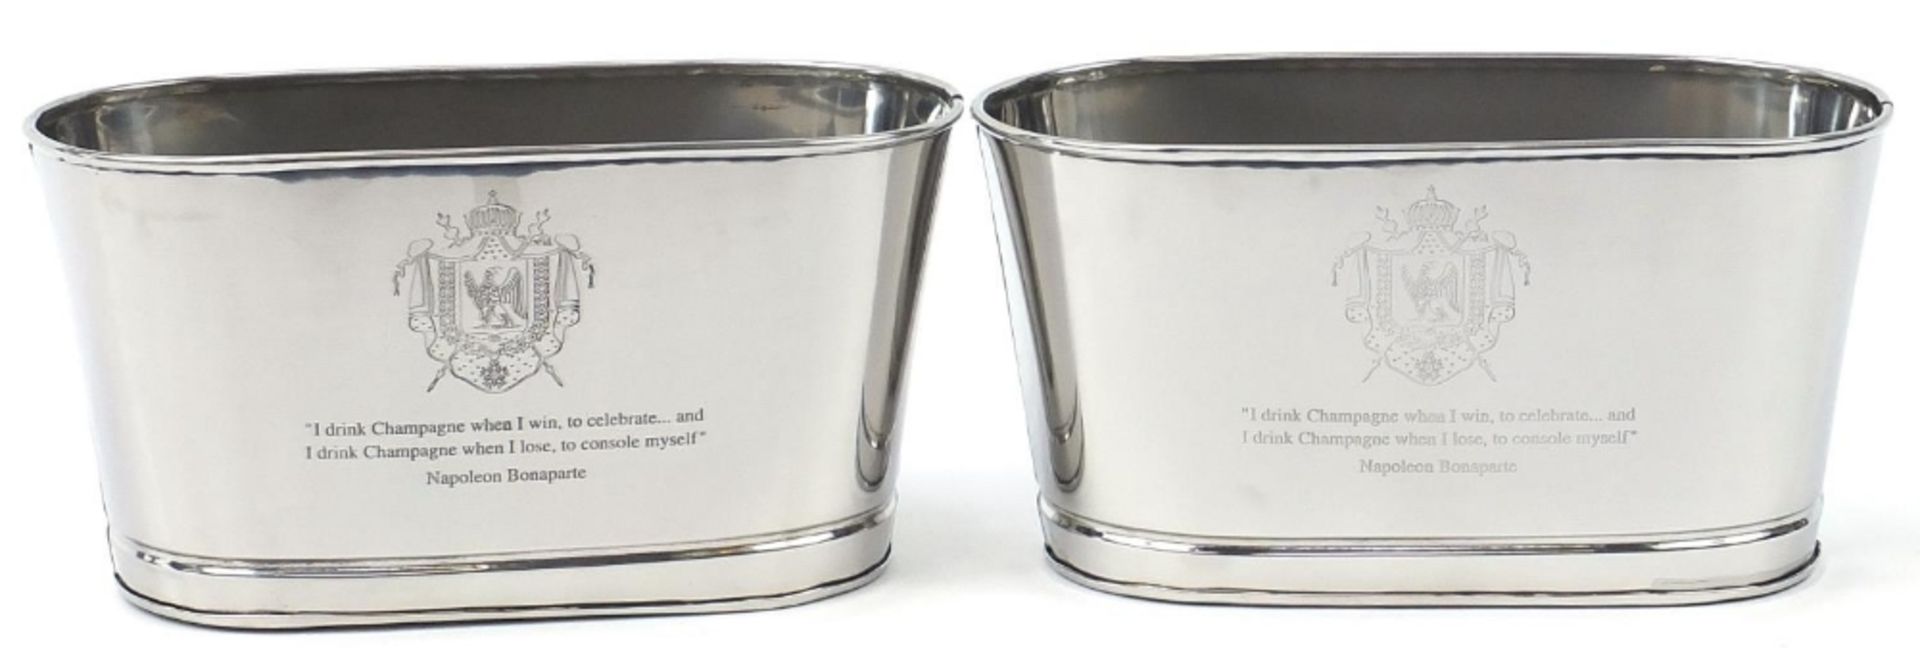 Pair of Champagne ice buckets with Napoleon Bonaparte and Lily Bollinger mottos, 15.5cm H x 30cm W x